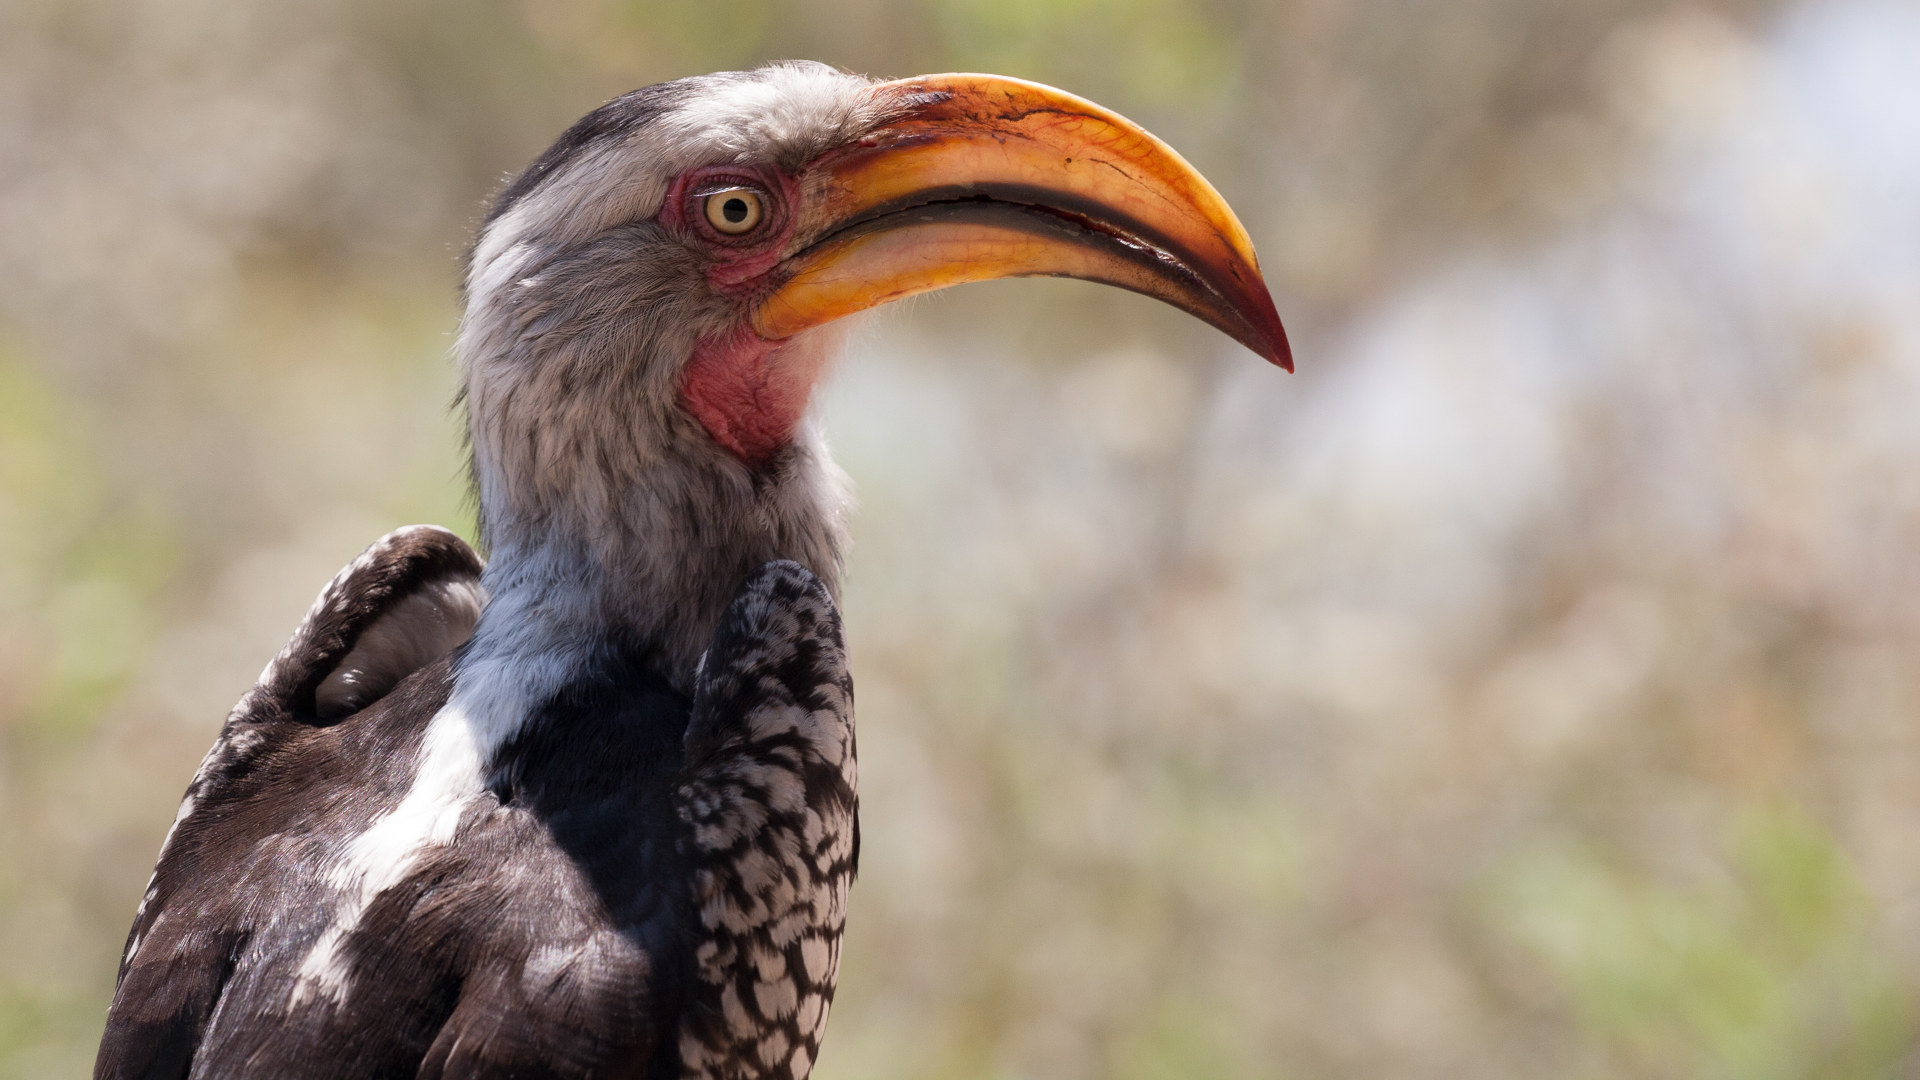 A southern yellow-billed hornbill in South Africa.